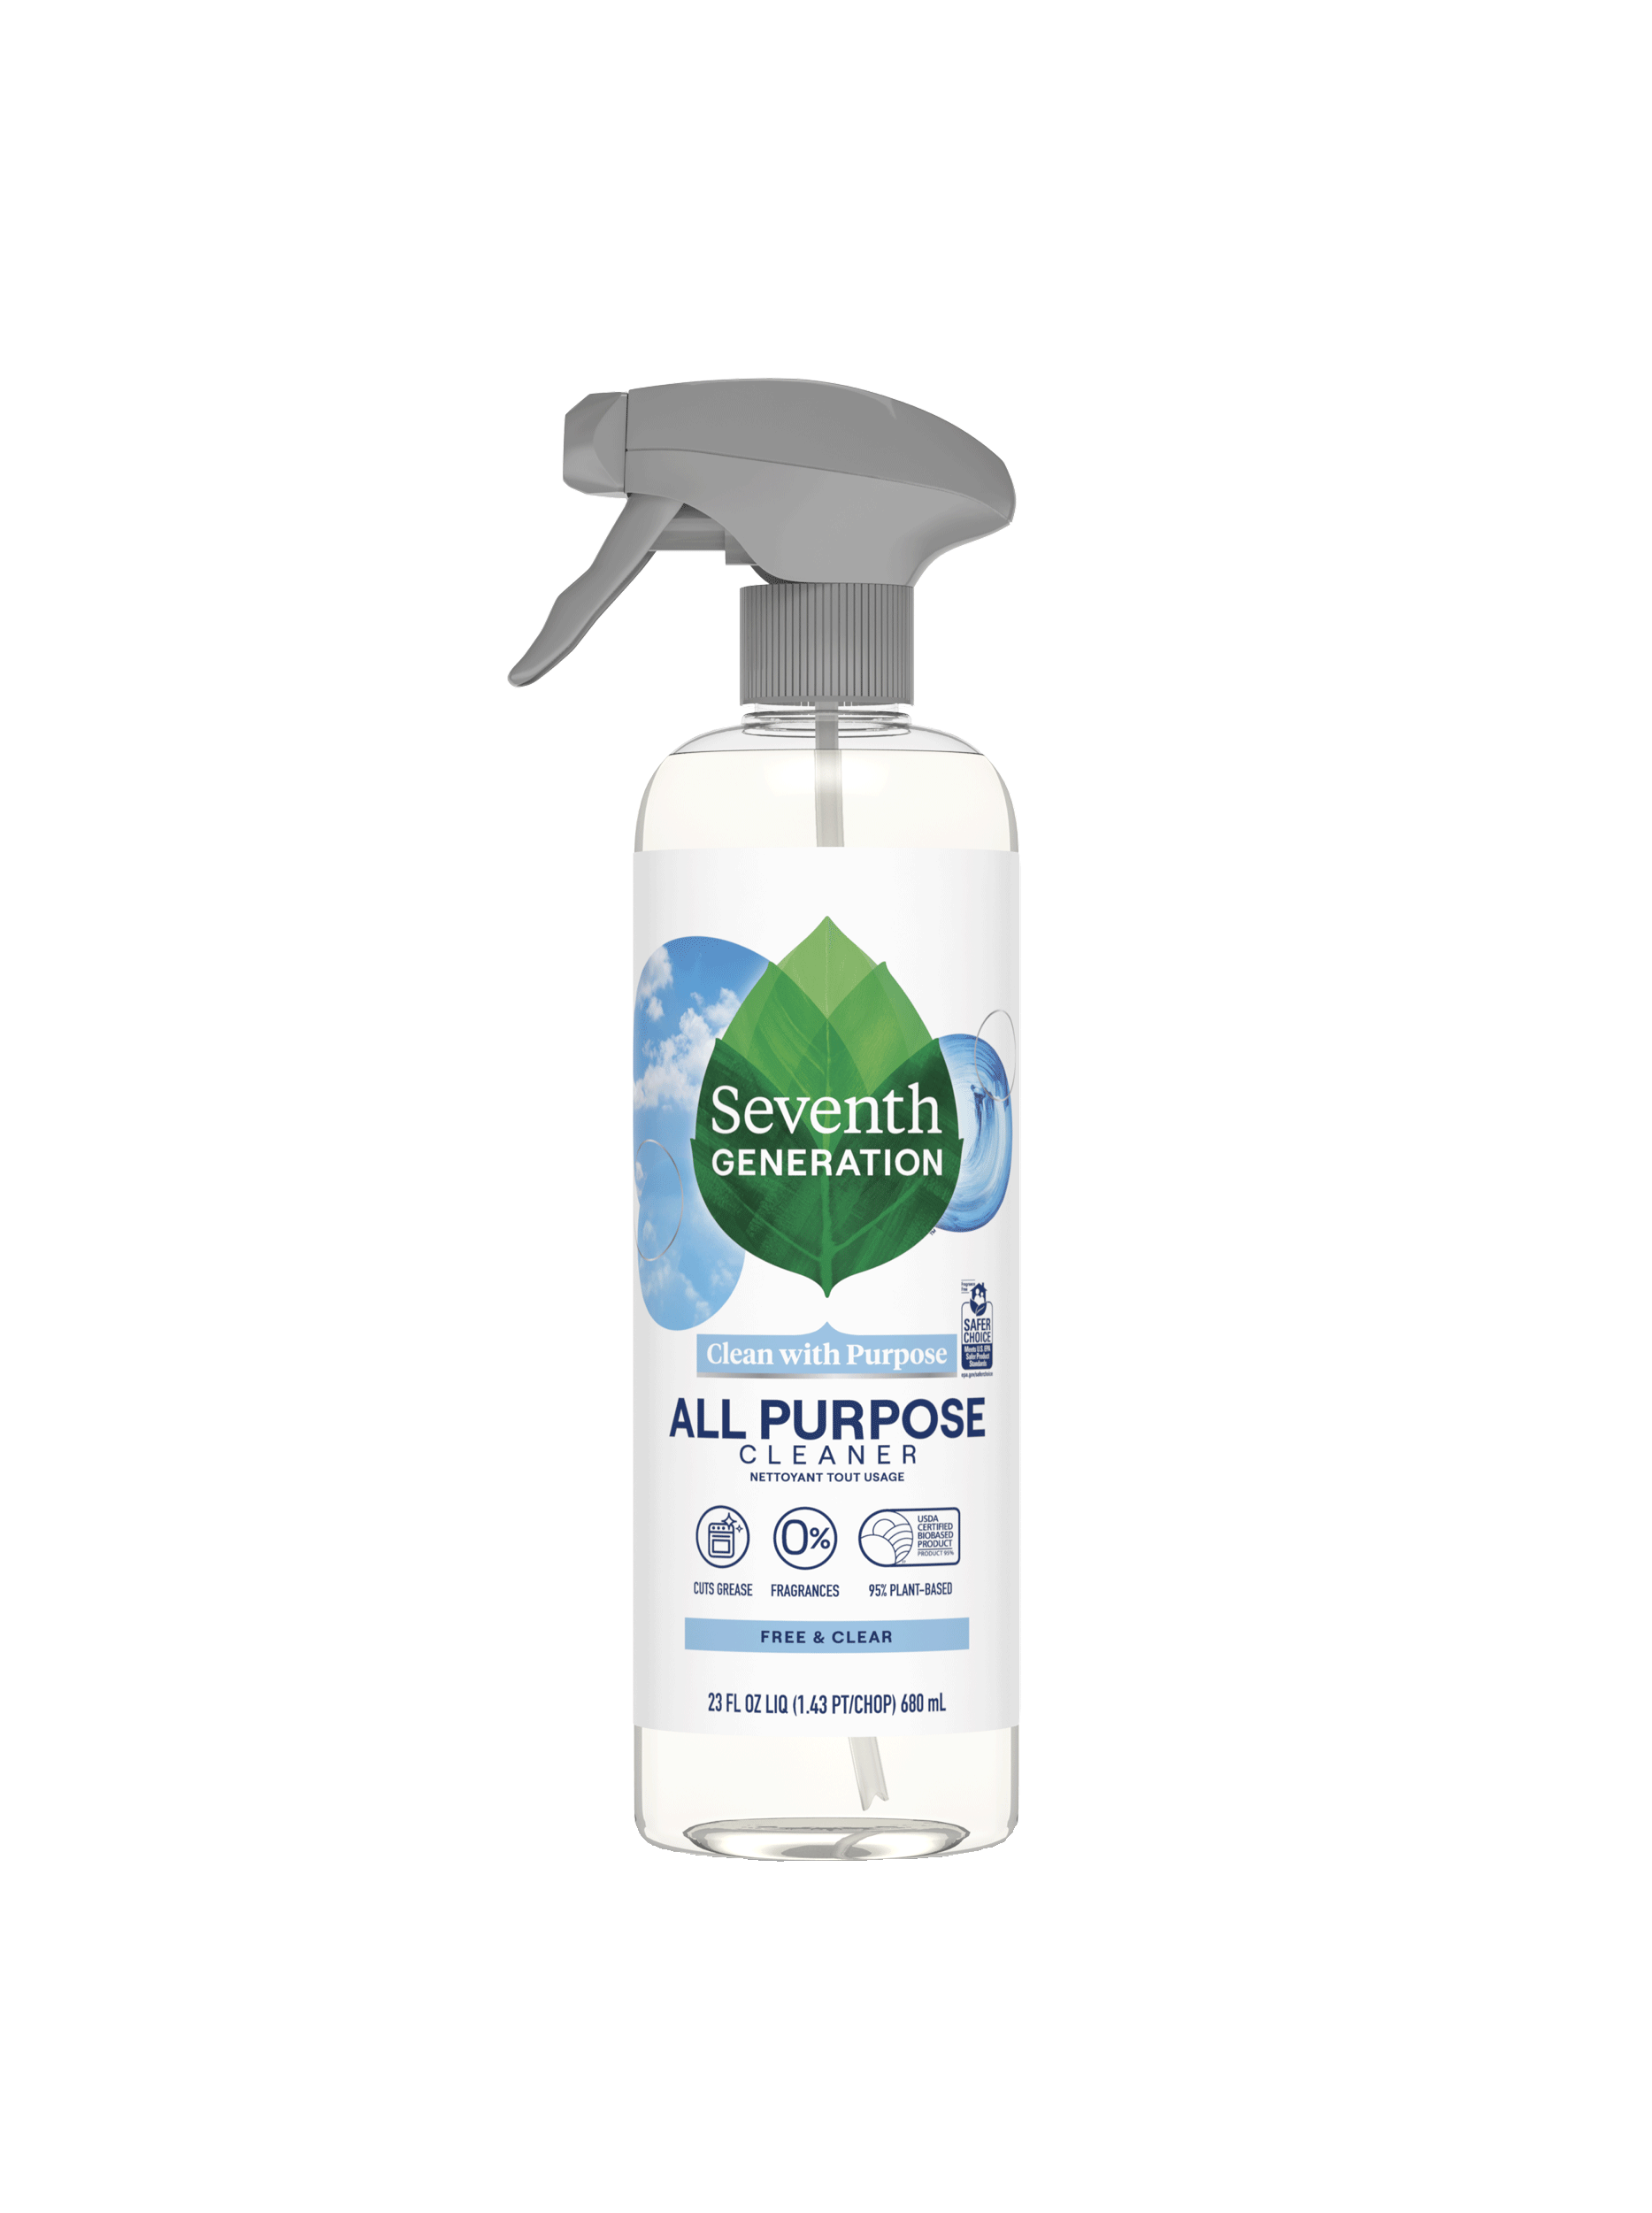 Tangle Et kors Lydighed All Purpose Cleaner - Free & Clear | Seventh Generation